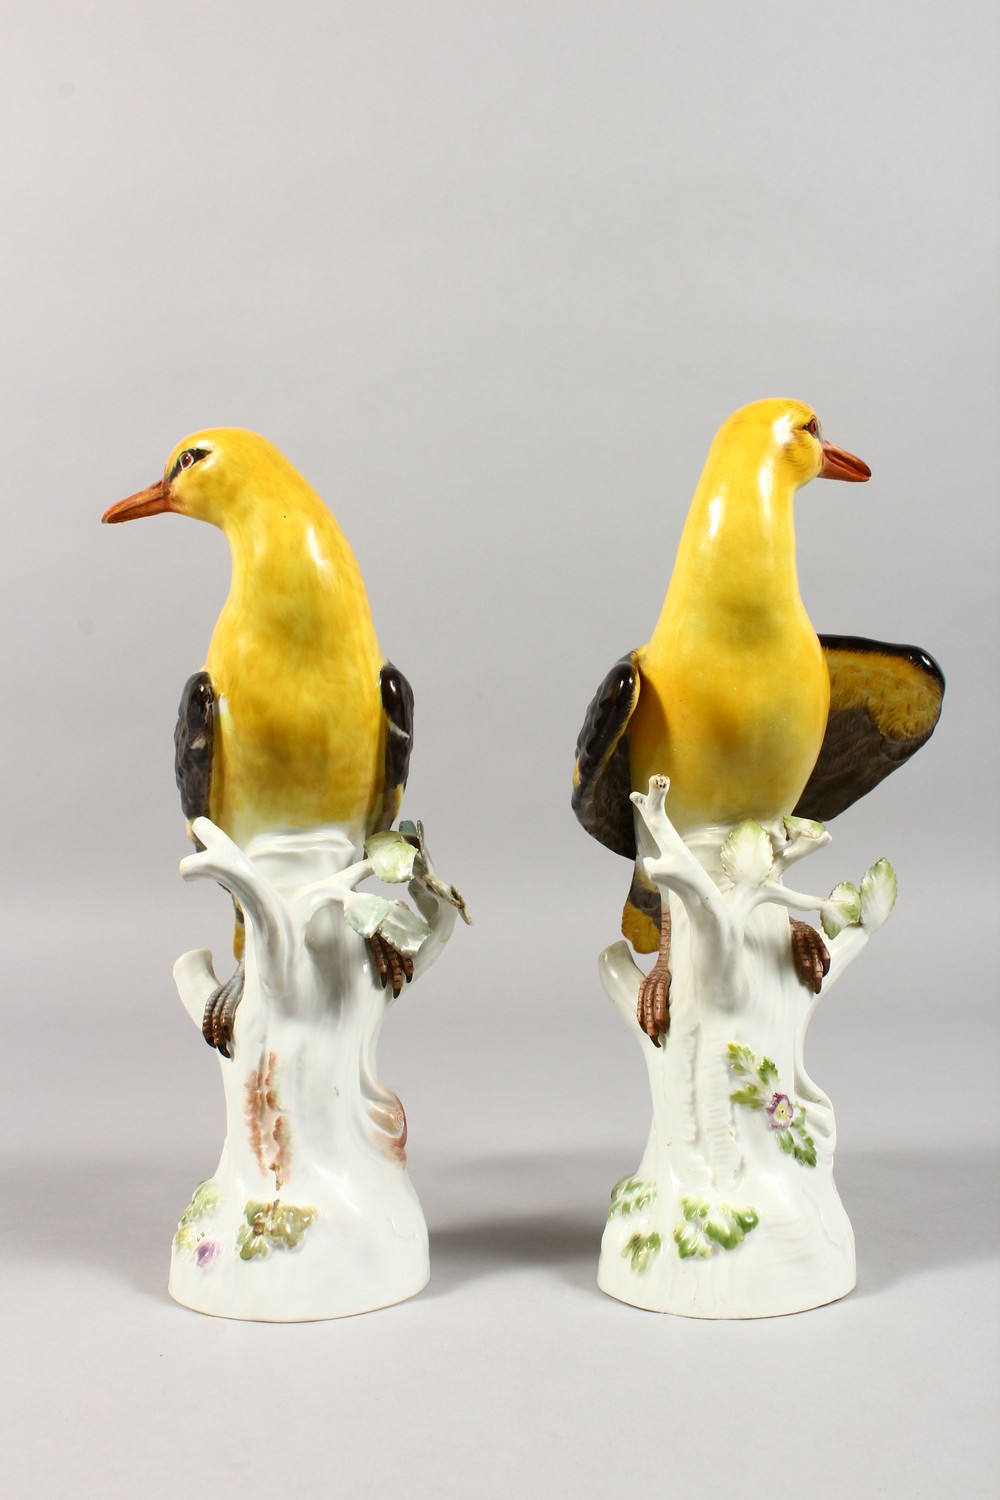 A VERY GOOD PAIR OF 19TH CENTURY MEISSEN BIRDS "GOLDEN ORIOLES" standing on encrusted tree stumps. - Image 5 of 18